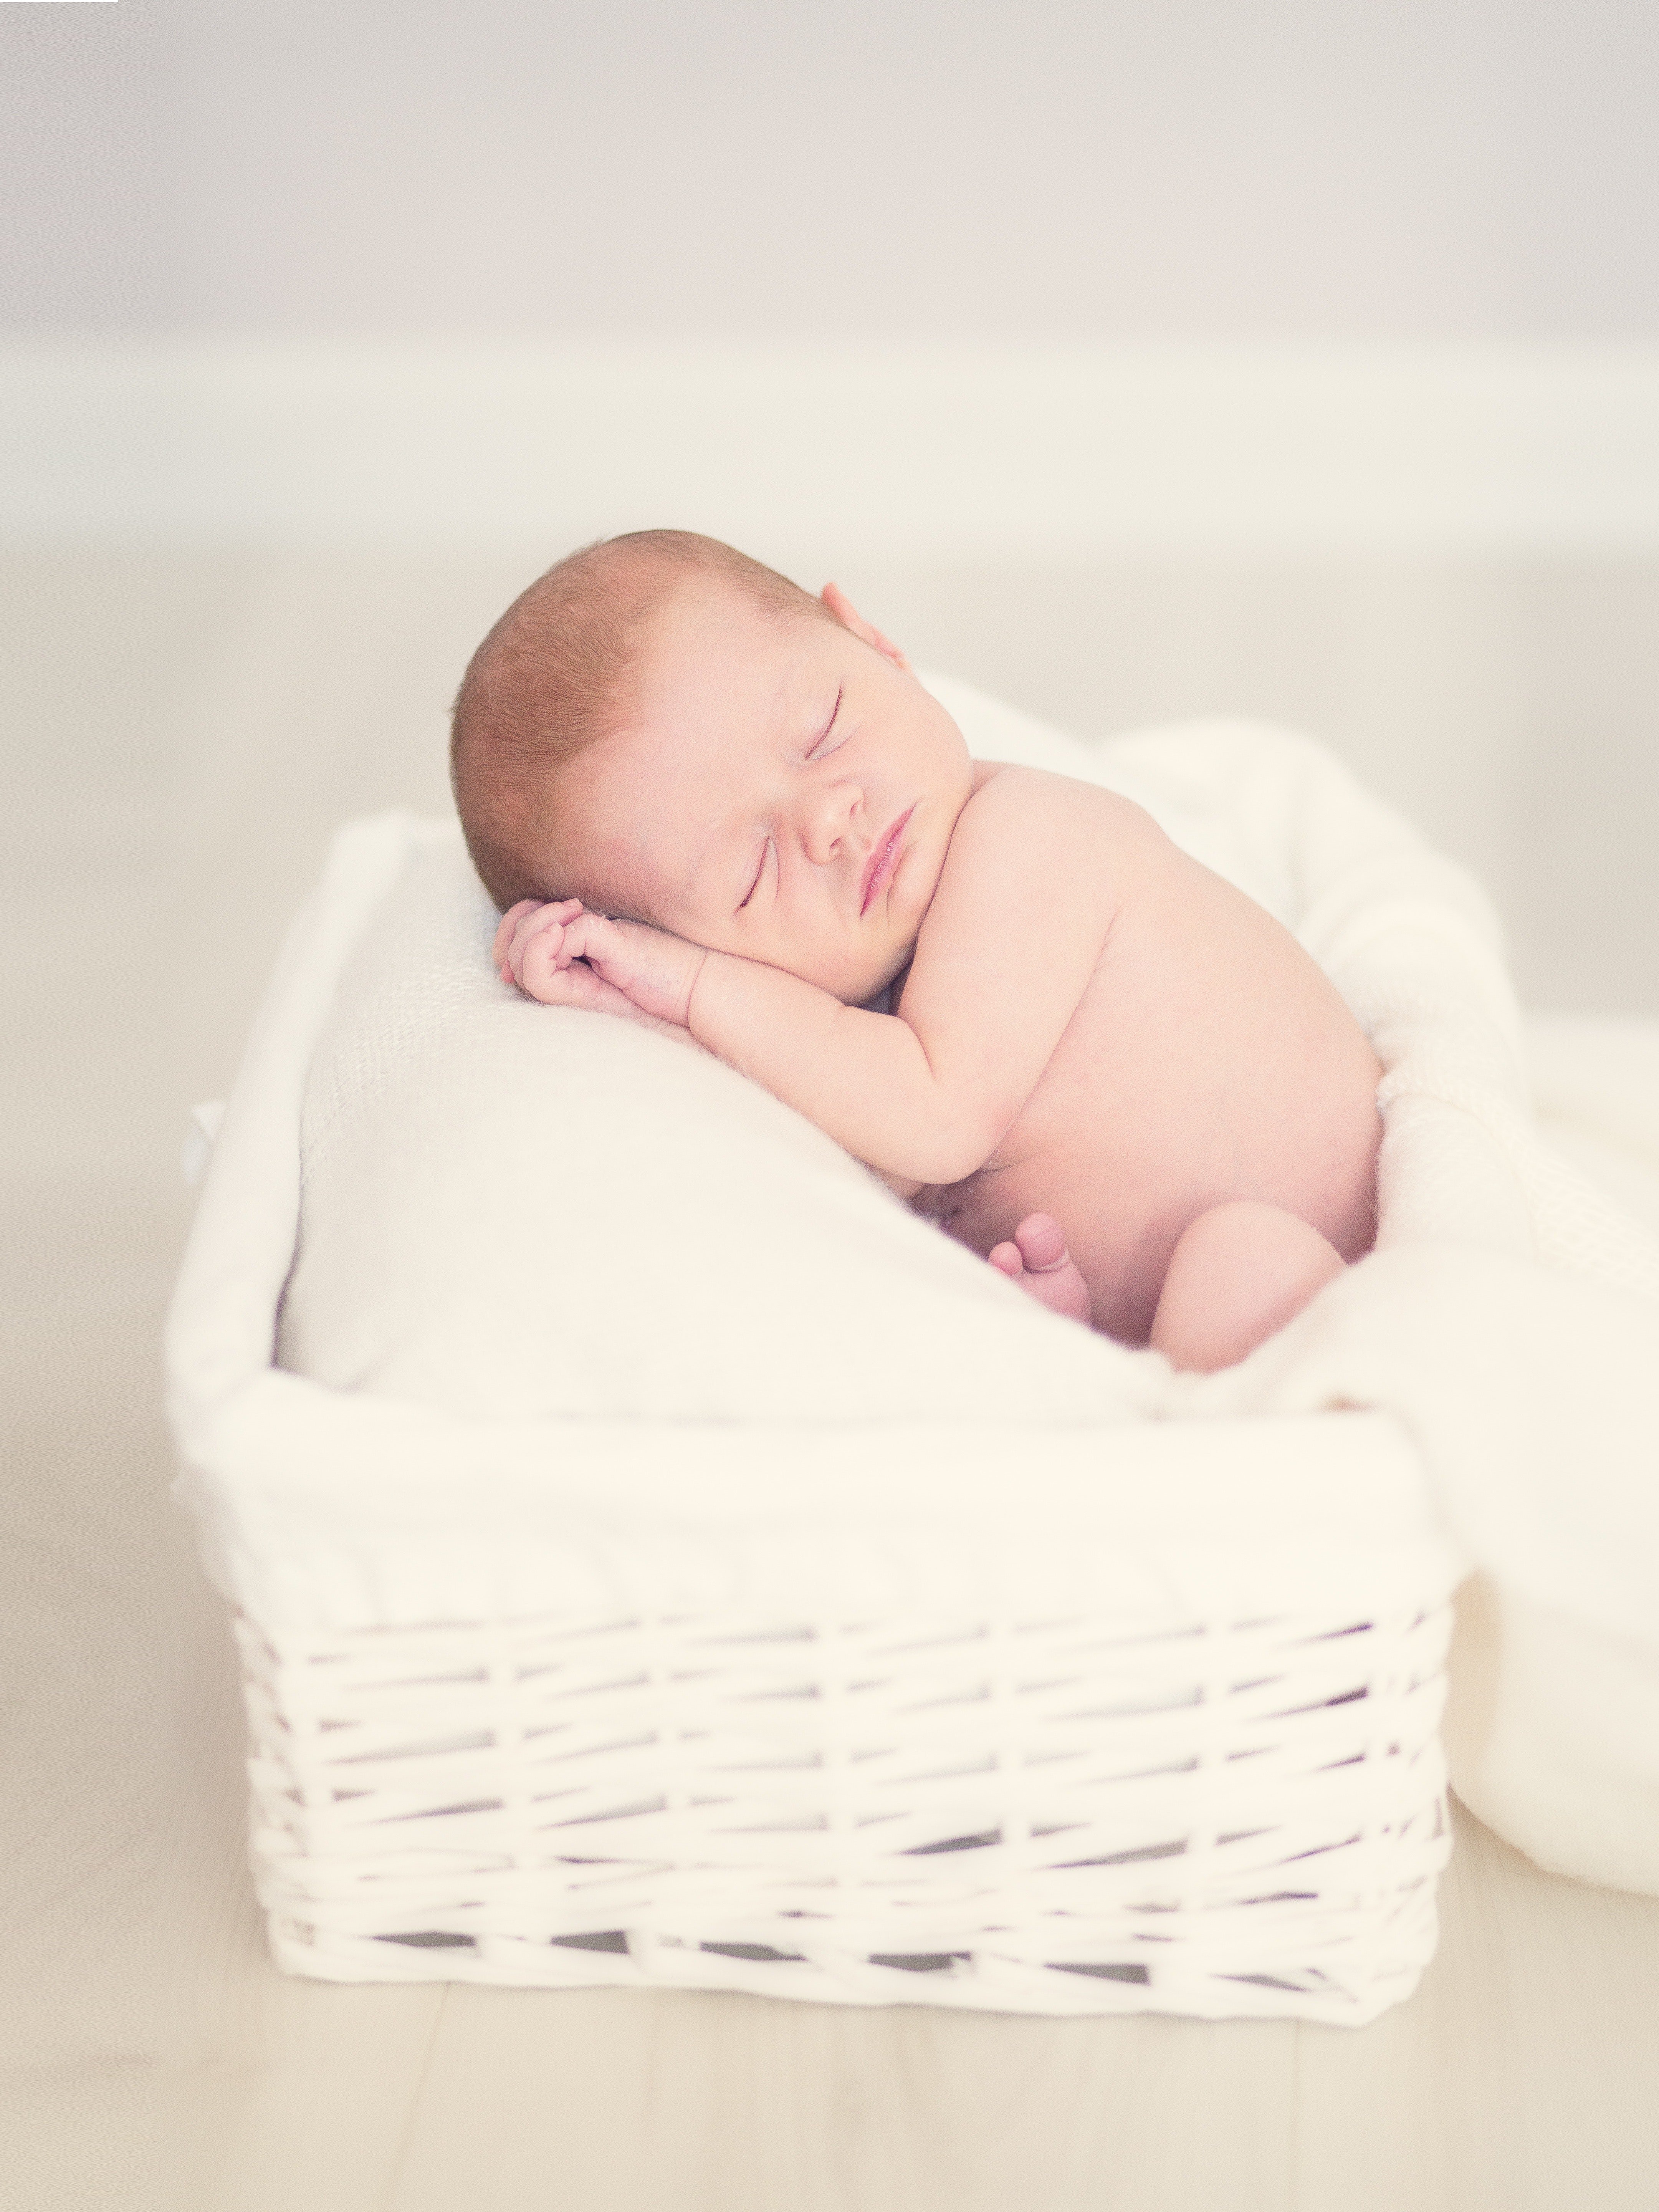 Unique Unisex Names That You’ll Want To Name Your Next Baby